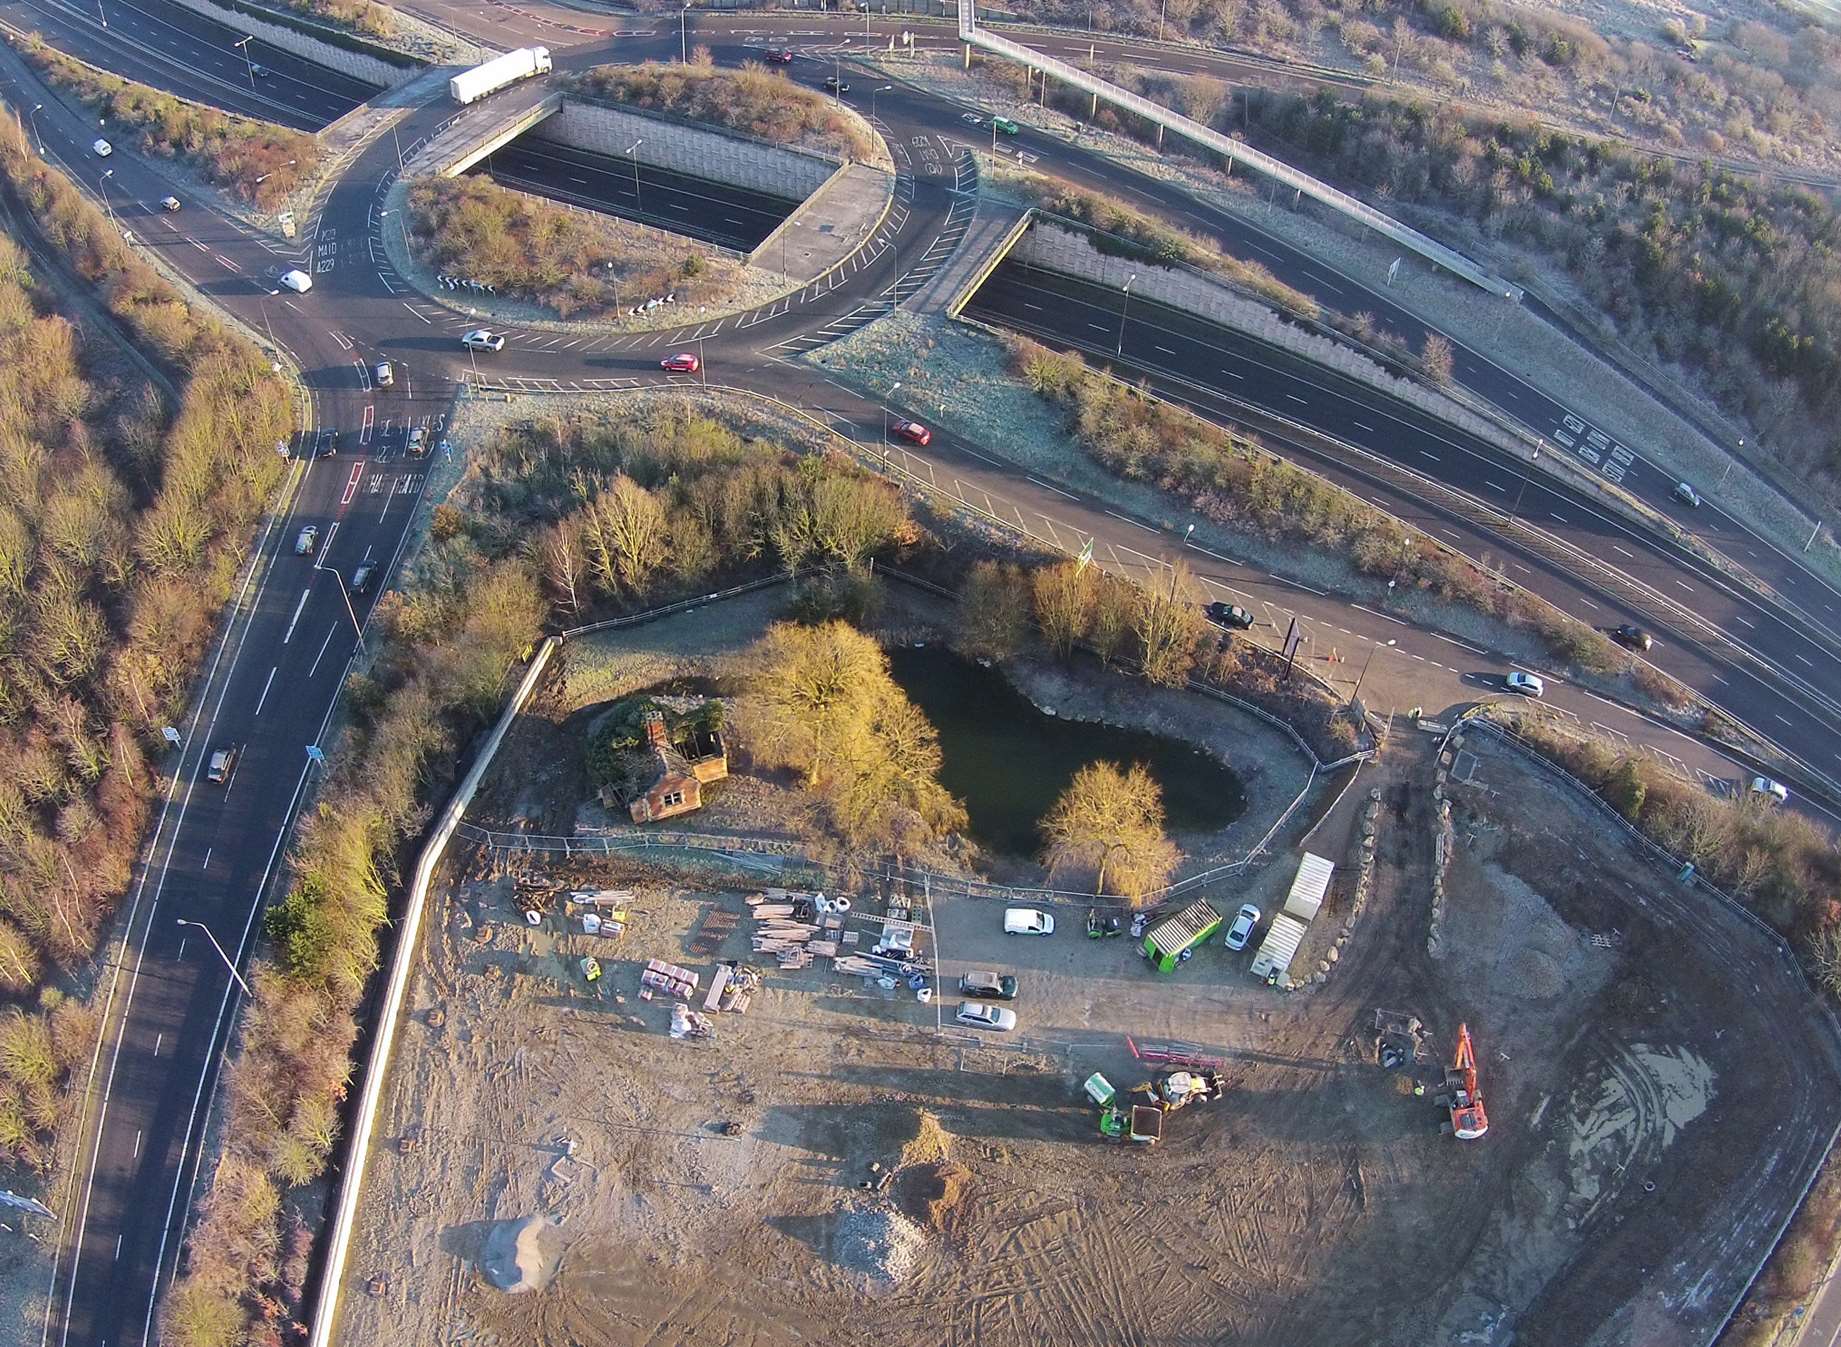 Building work has begun on the site off the A229 - on the right is the M20